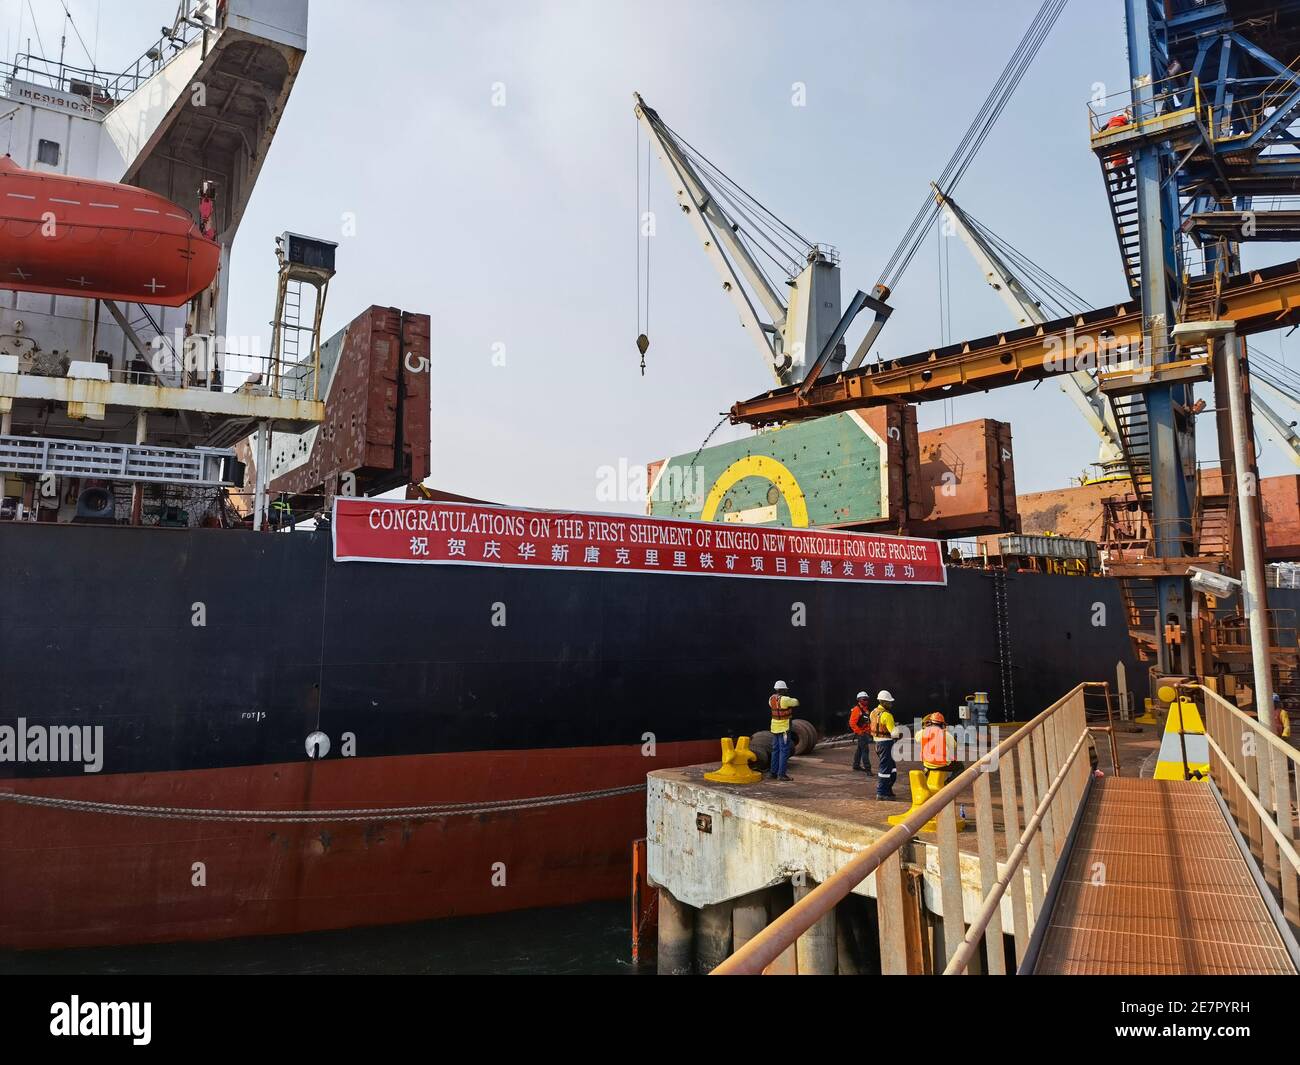 (210130) -- FREETOWN, Jan. 30, 2021 (Xinhua) -- A ship is loaded with iron ore before heading to China at Pepel Port in Sierra Leone, Jan. 26, 2021. The first shipment of iron ore from Sierra Leone's New Tonkolili Iron Ore Project set sail for China from the country's Pepel Port on Friday. The shipment was the first batch of products from Sierra Leone's New Tonkolili Iron Ore Project invested and operated by Kingho Investment Company Limited, a Chinese-owned private company. Zhao Ting, Chief Executive Officer of the company, said the project, which started in September 2020, covers an a Stock Photo